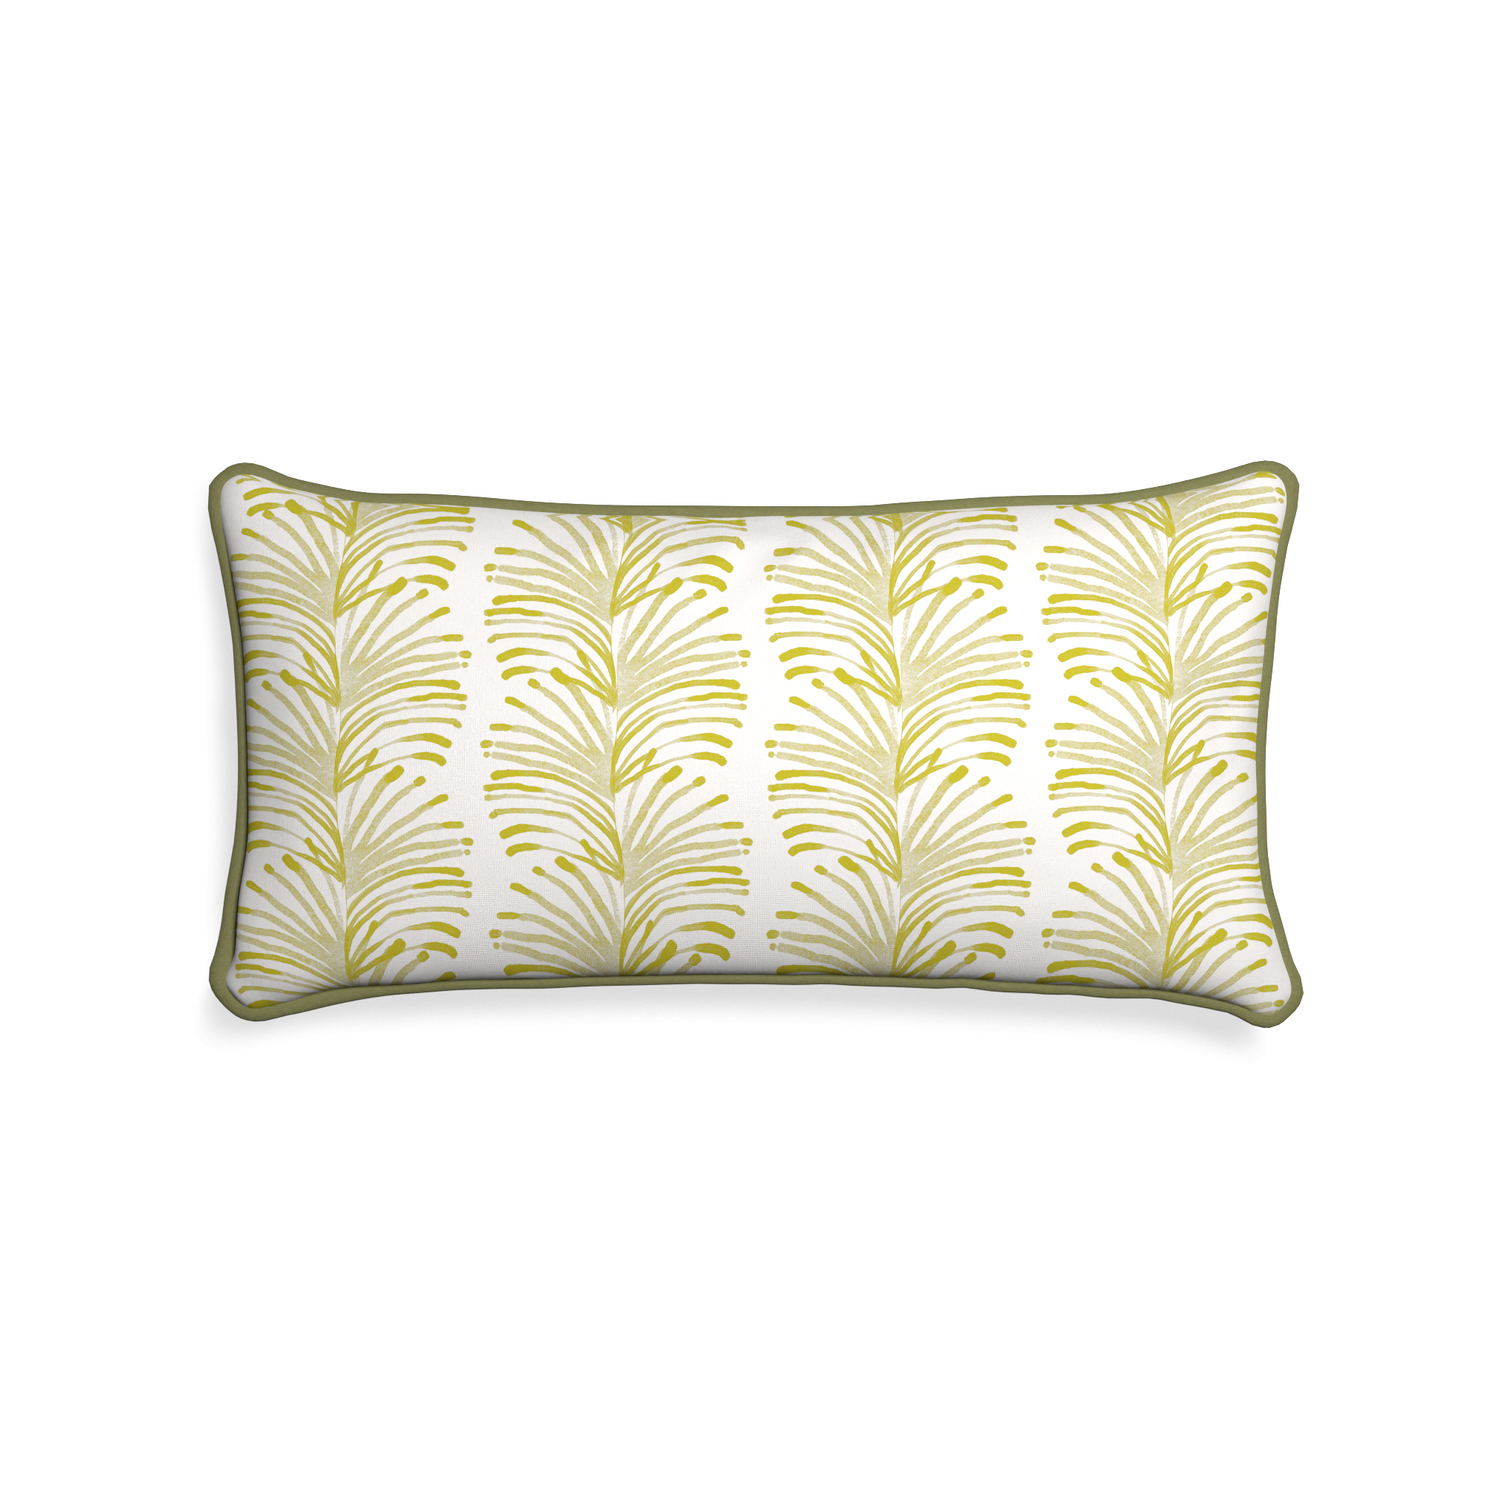 Midi-lumbar emma chartreuse custom yellow stripe chartreusepillow with moss piping on white background